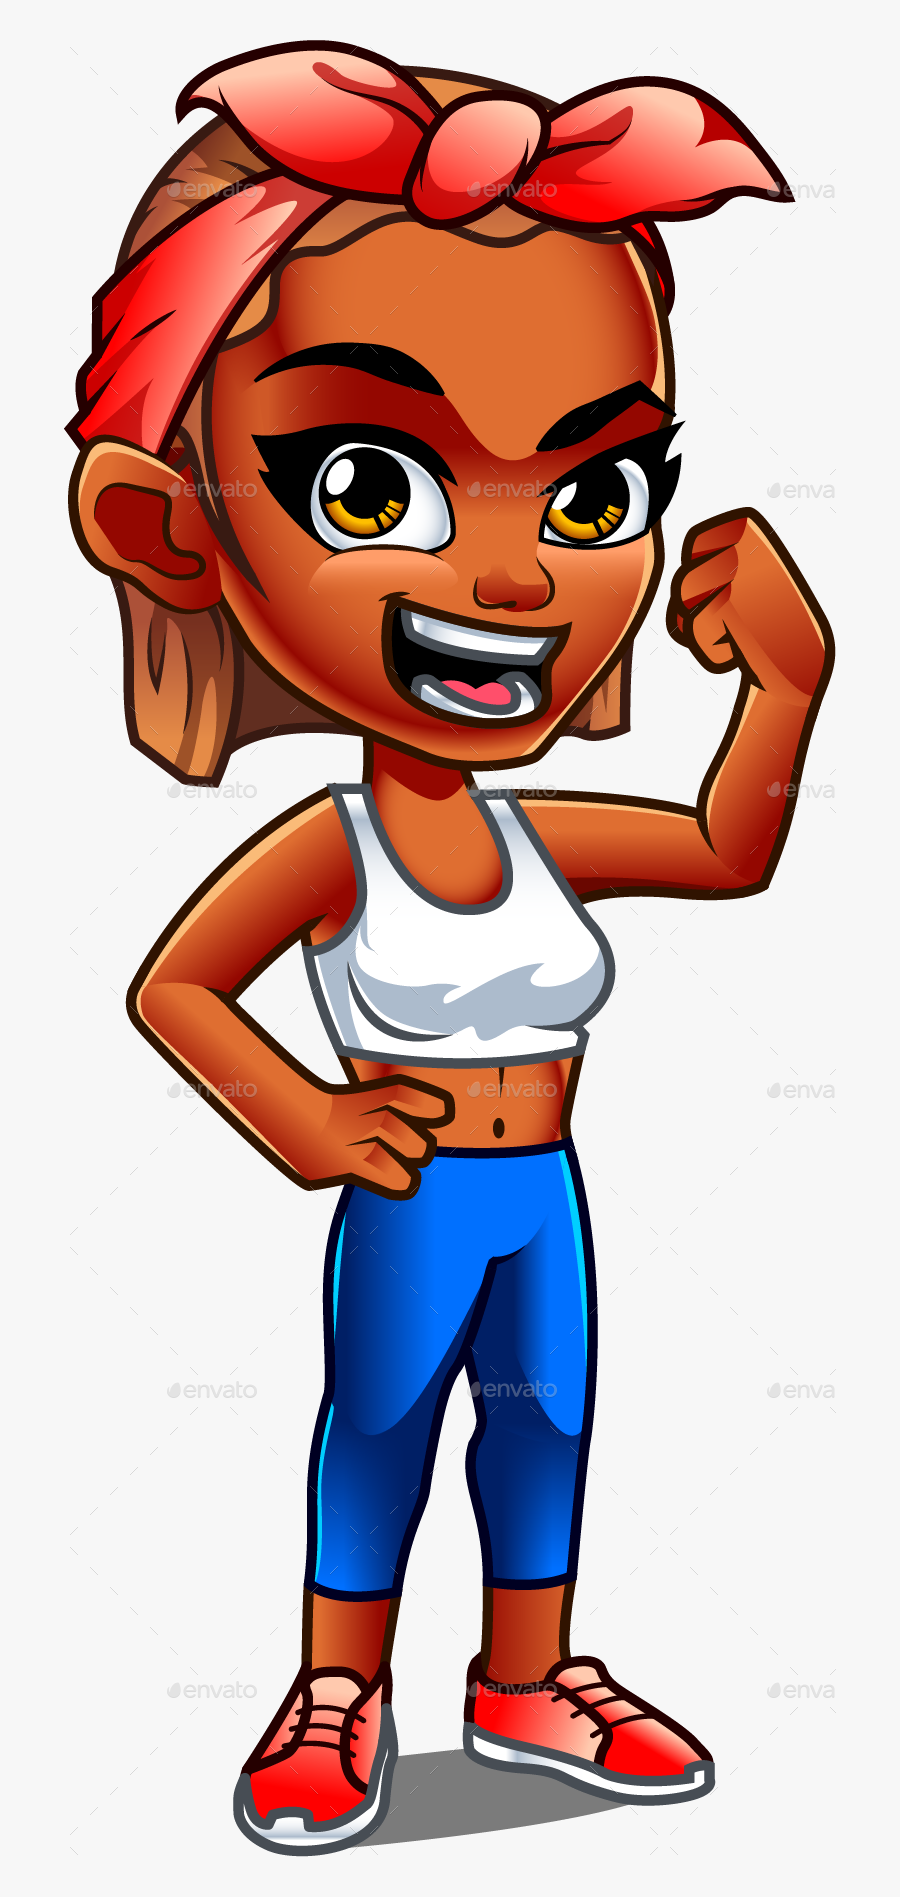 Strong Woman Cartoon / The best selection of royalty free strong woman